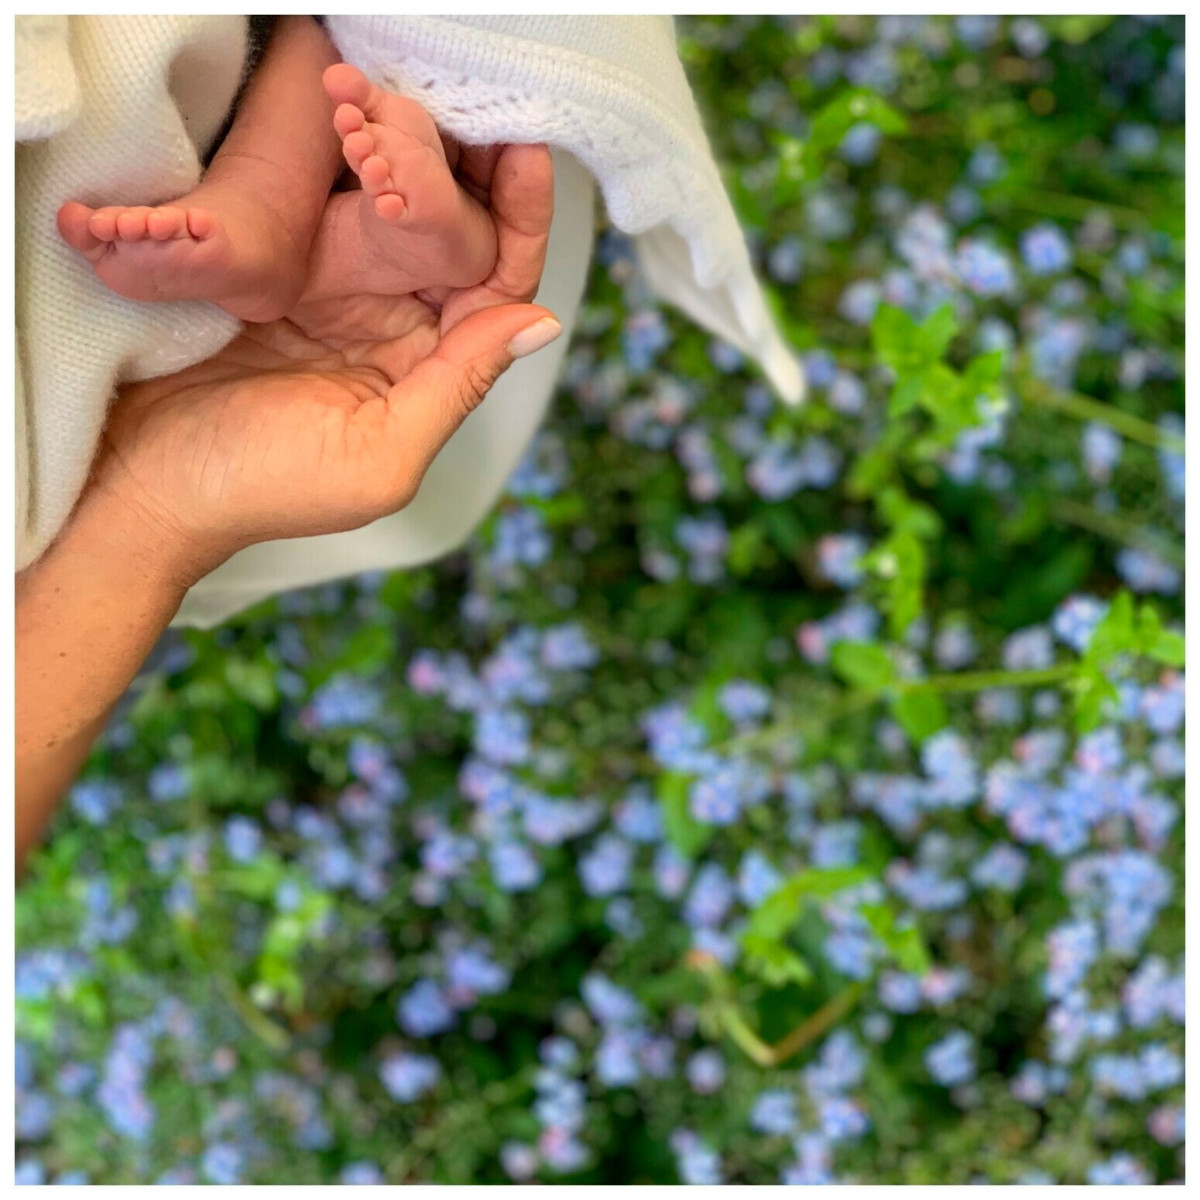 The Duchess of Sussex posted a sweet photo of baby Archie’s feet in the gardens of Frogmore Cottage to celebrate her first Mother’s Day last year